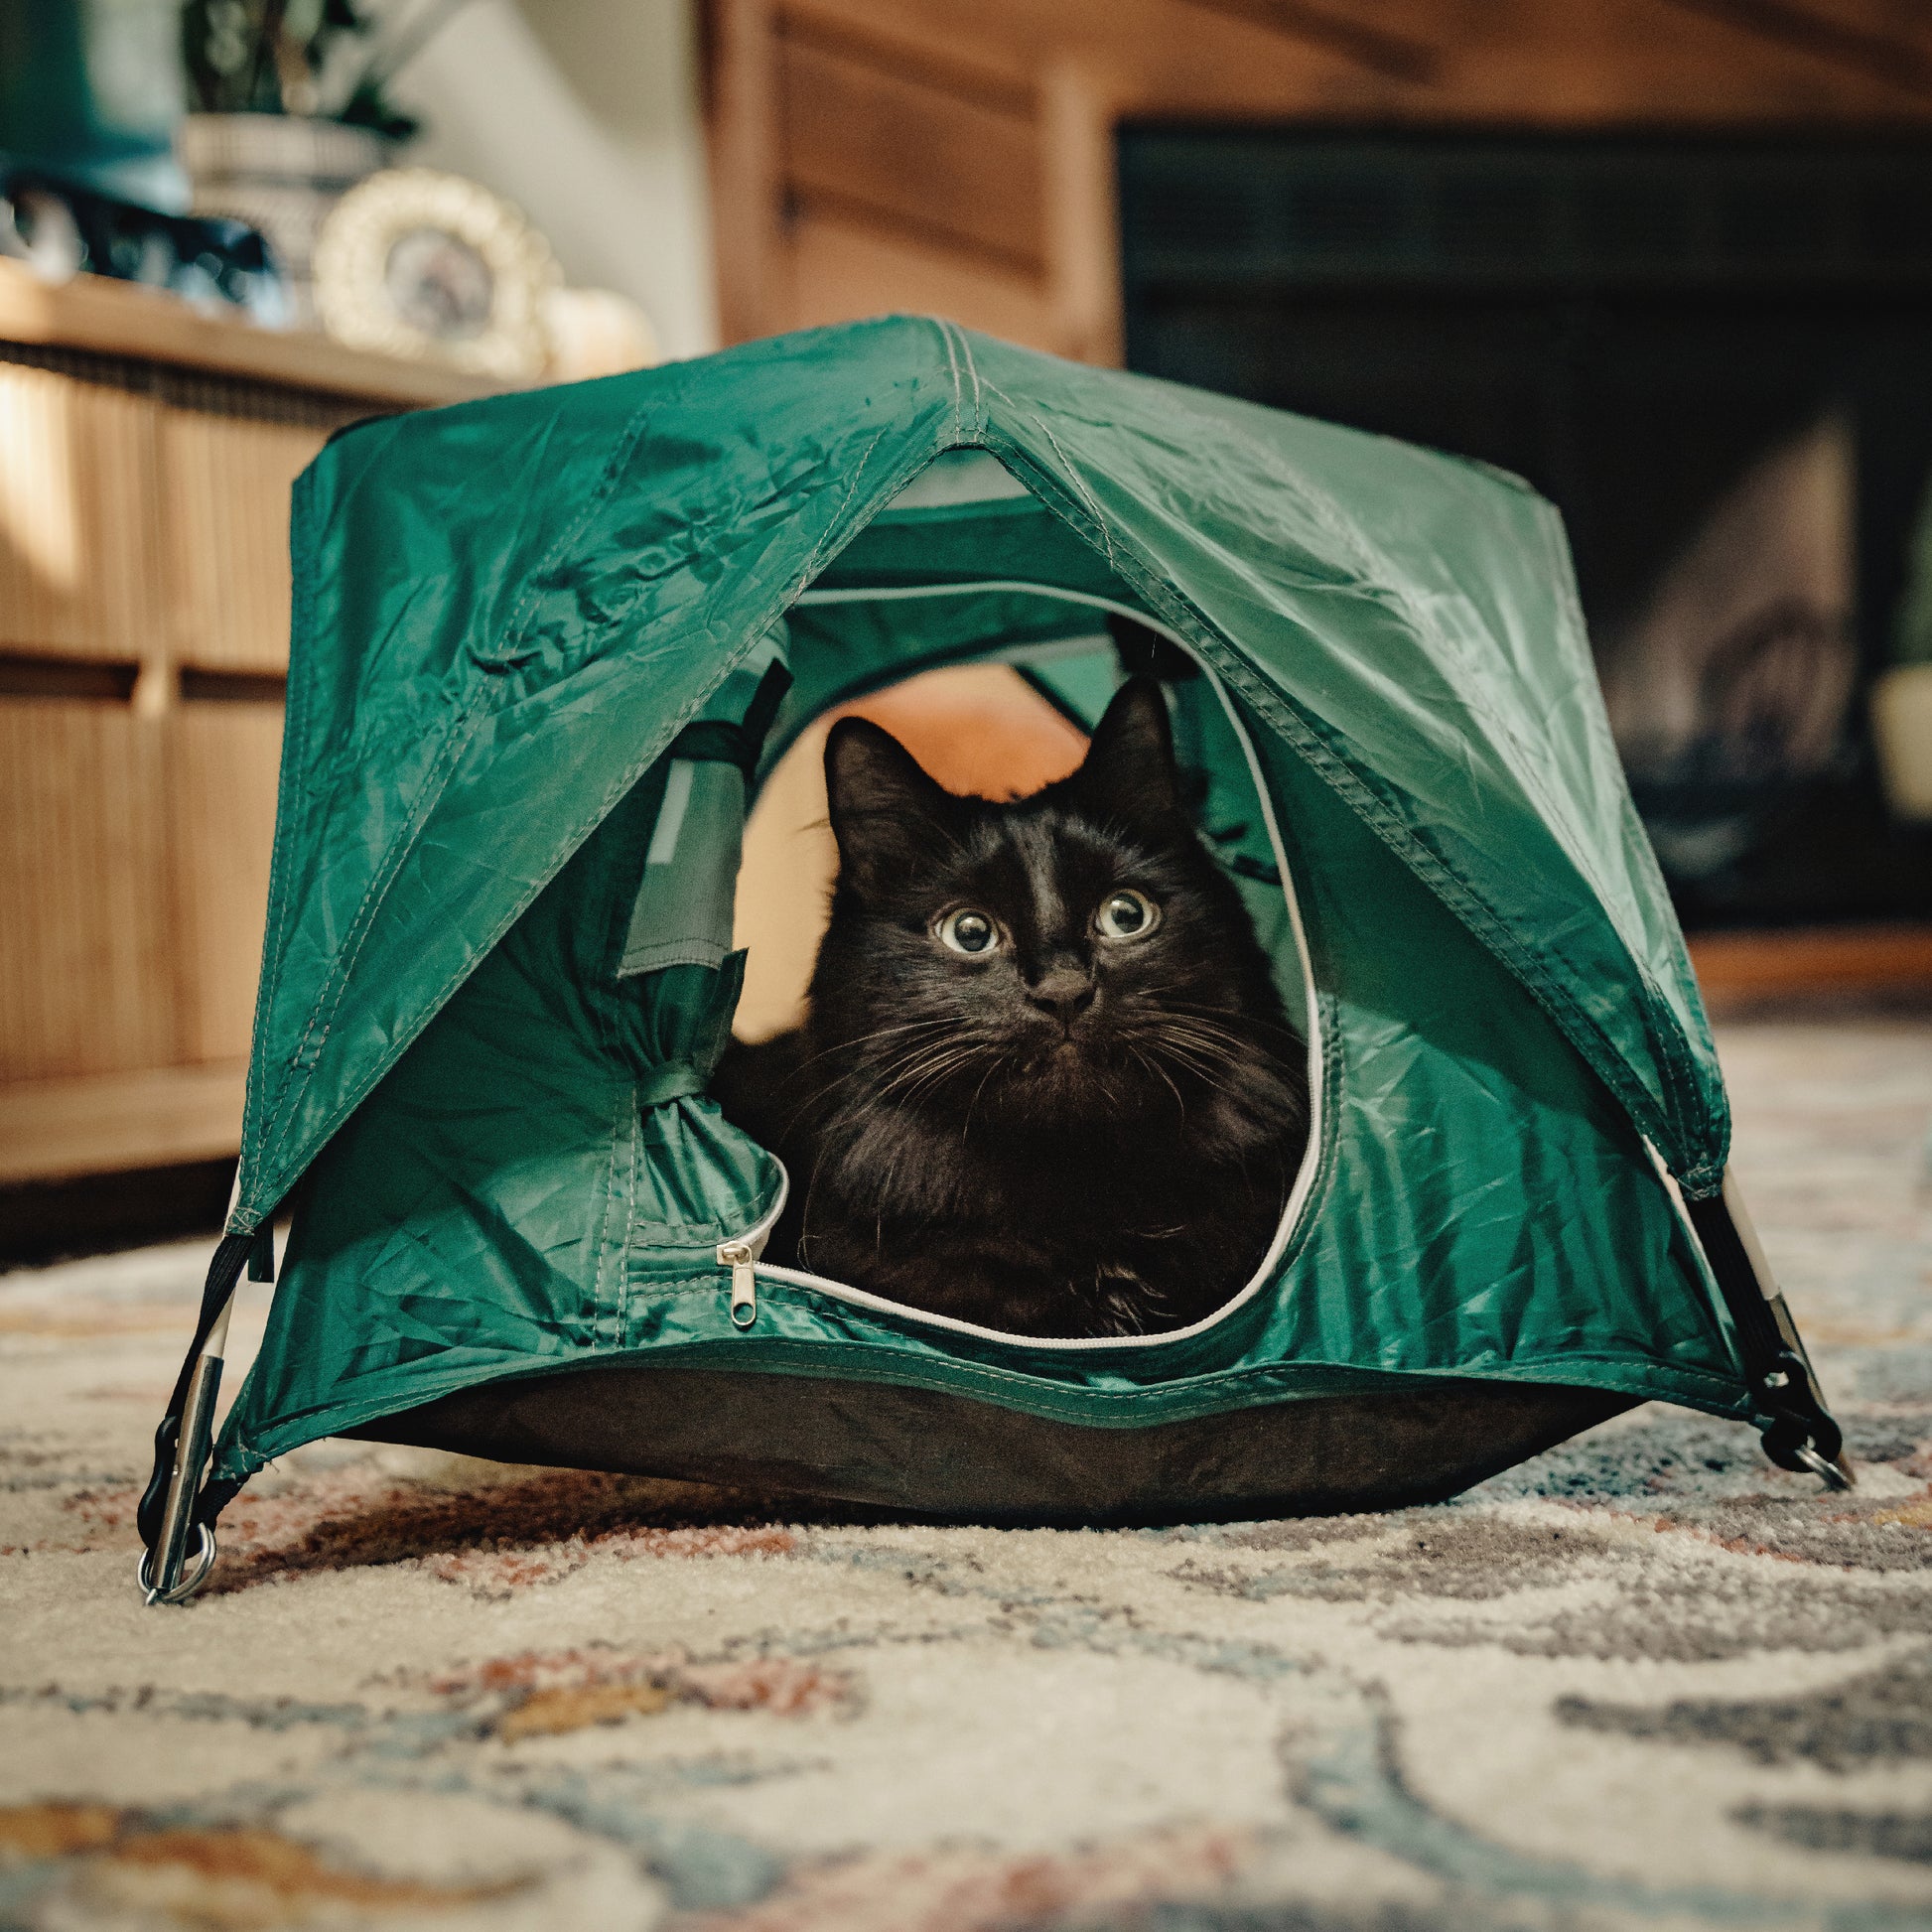 Green tiny tent shown in the home with a black cat resting inside.